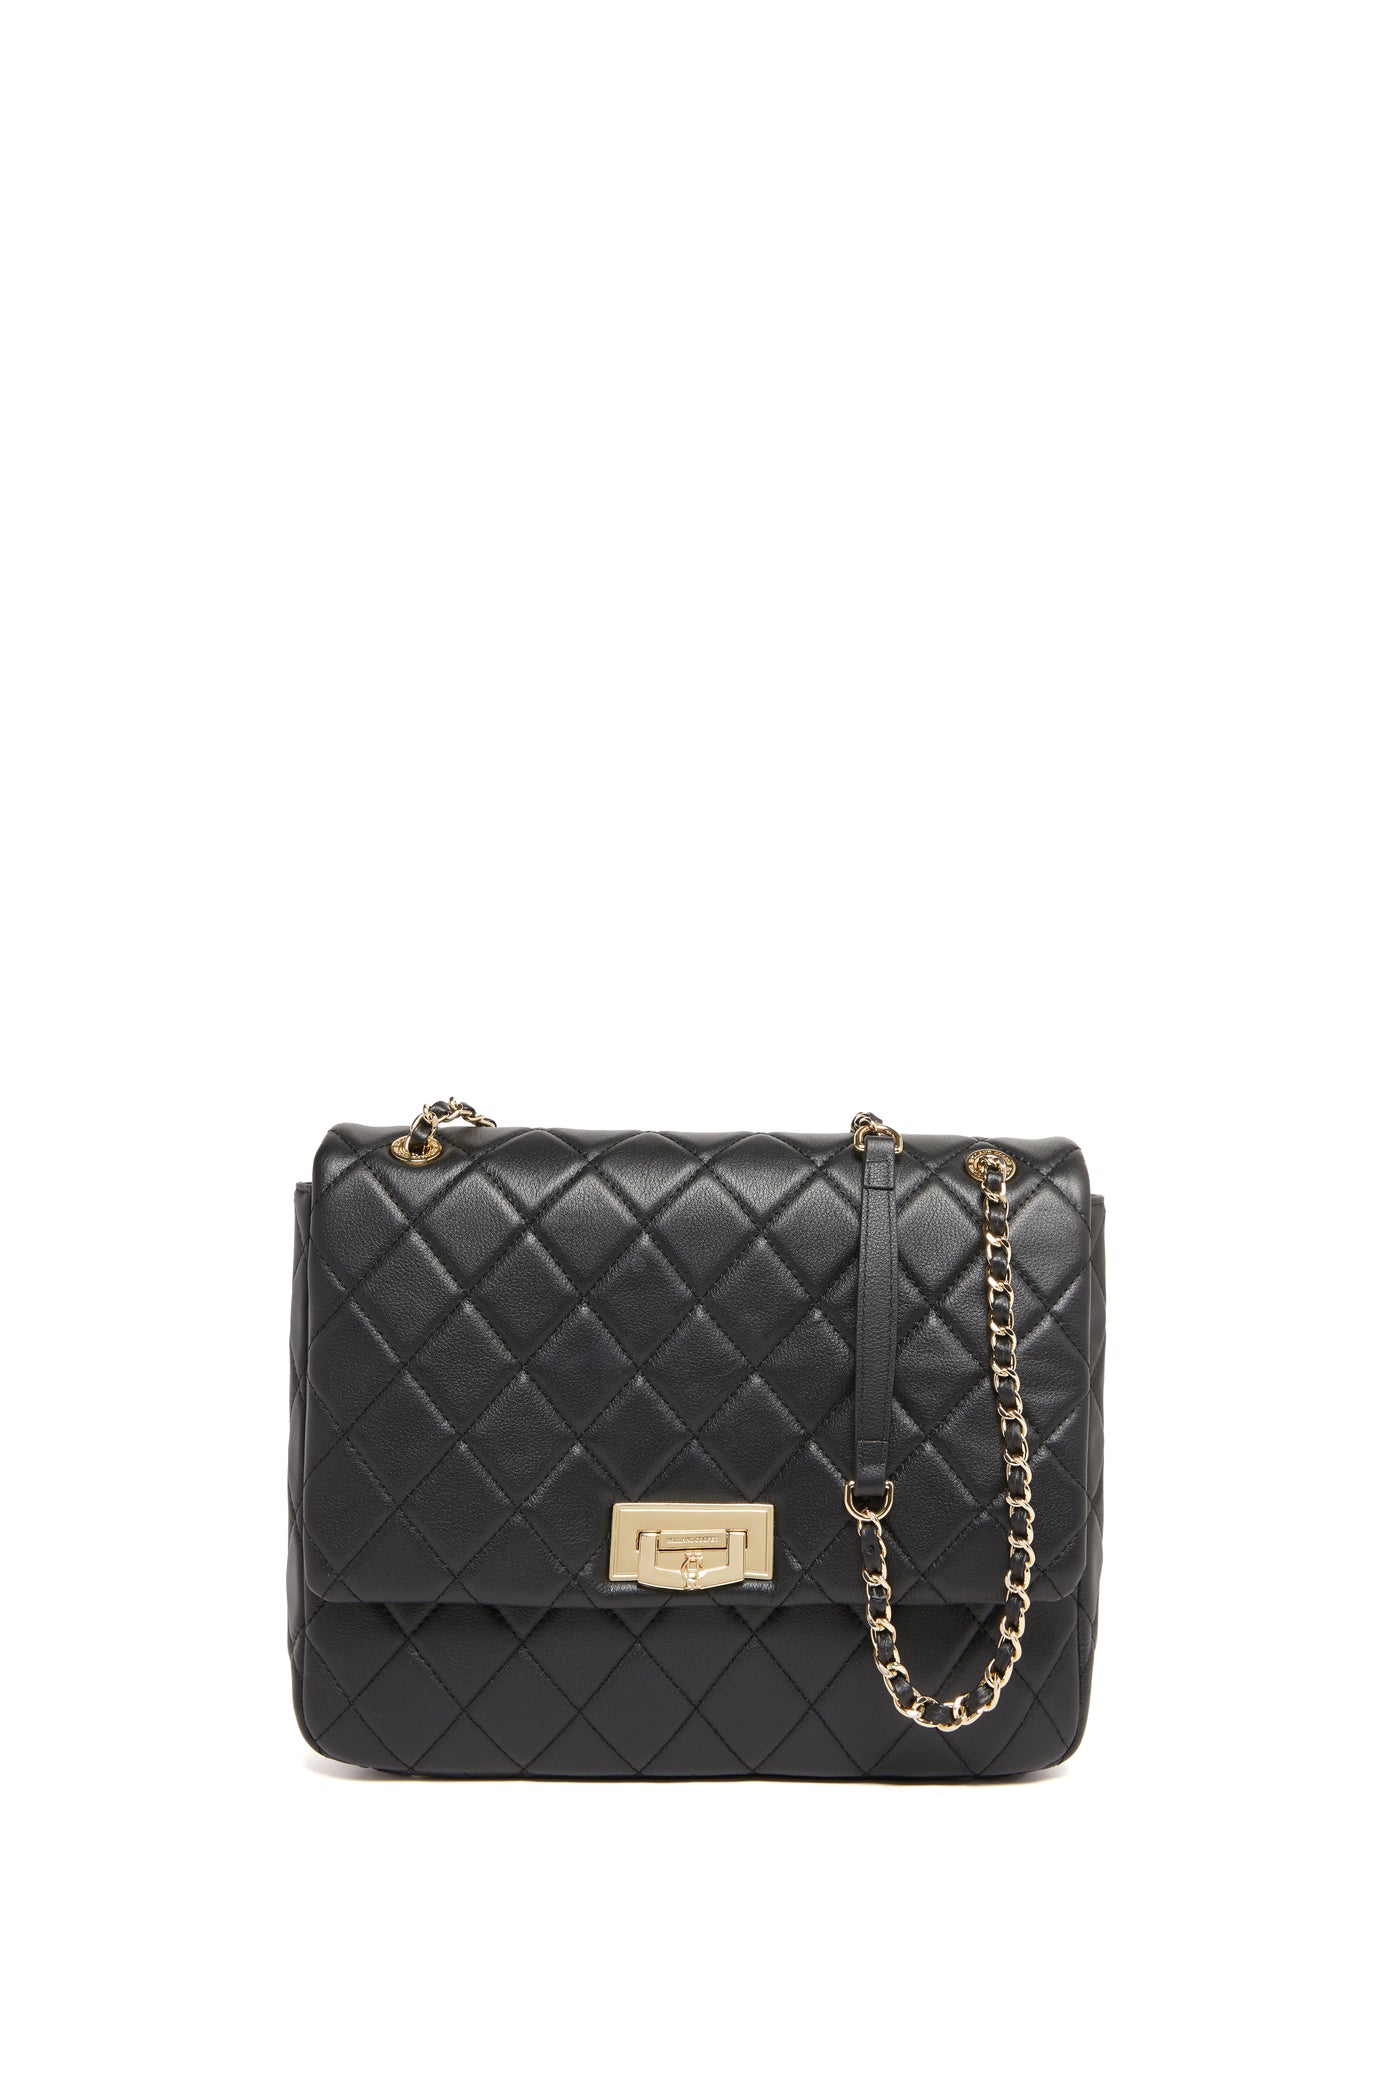 Holland Cooper Quilted Soho Bag in Black Front